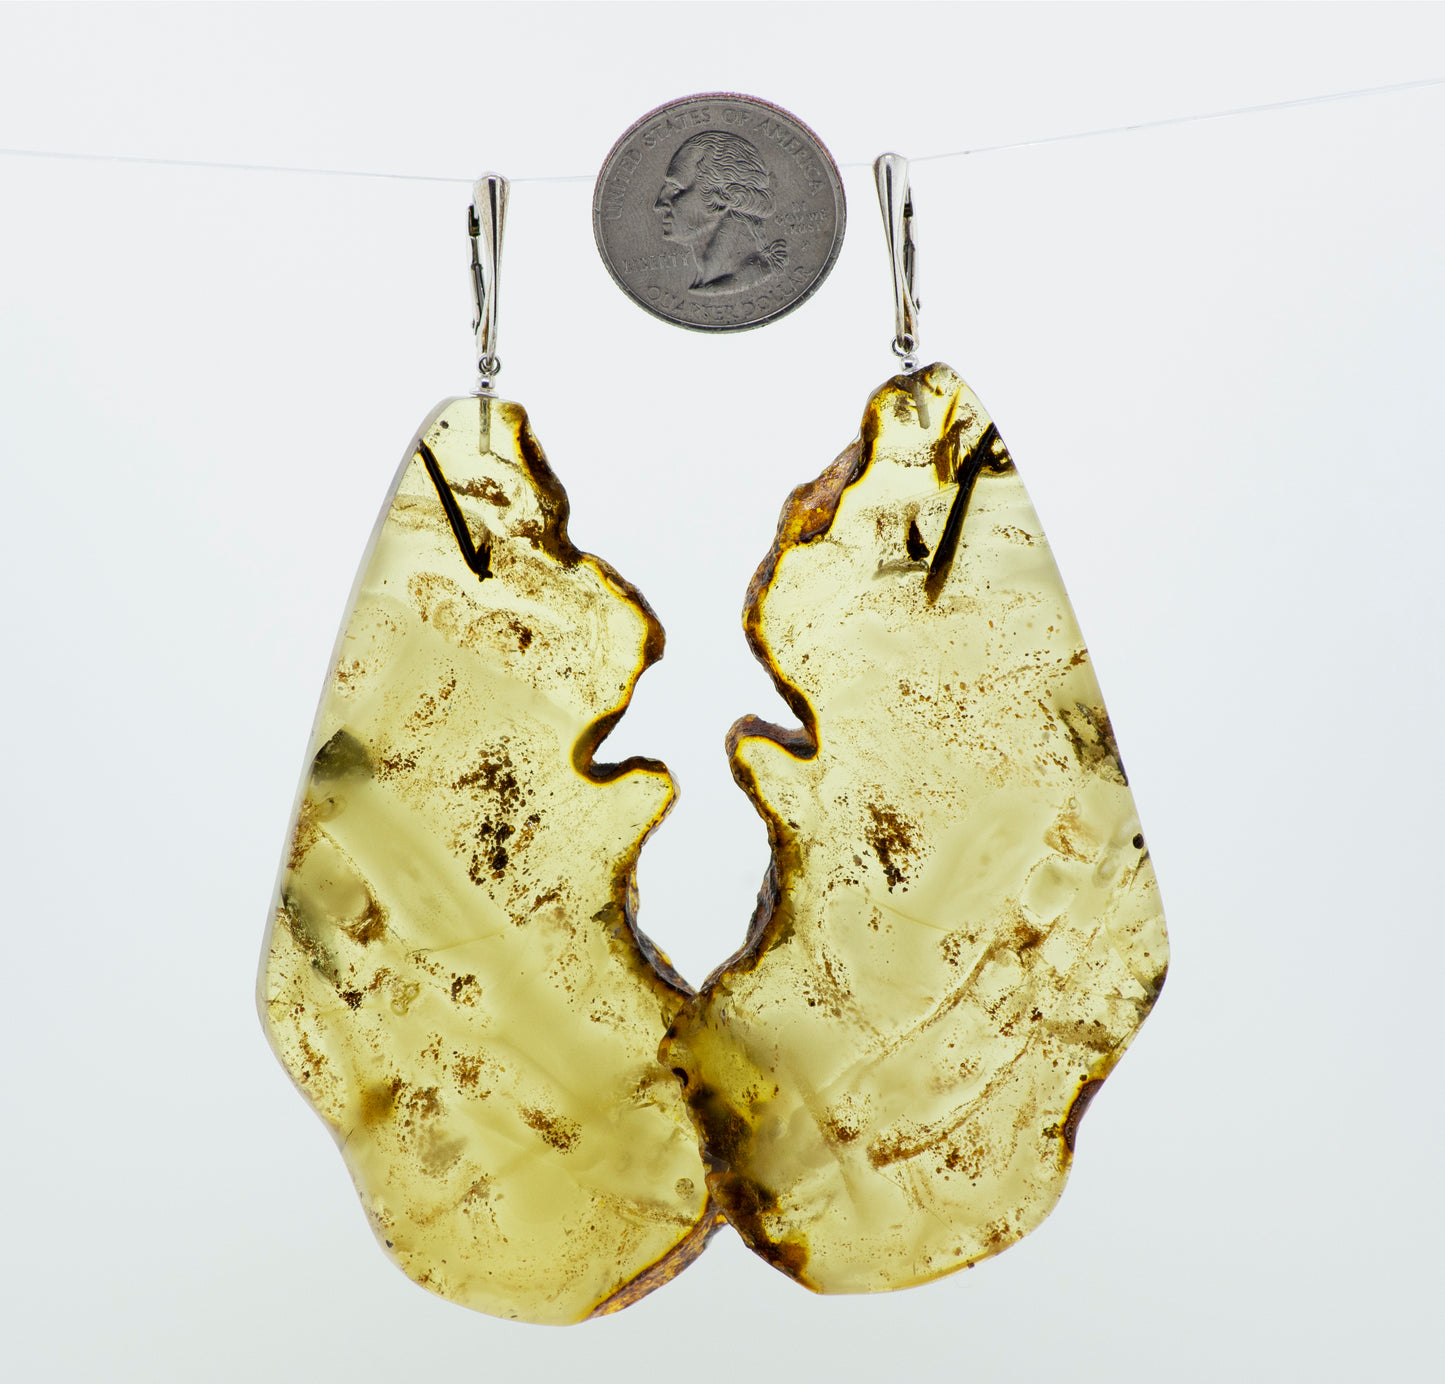 A pair of Designer Raw Cognac Amber Slab Earrings by Super Silver hanging on a wire.